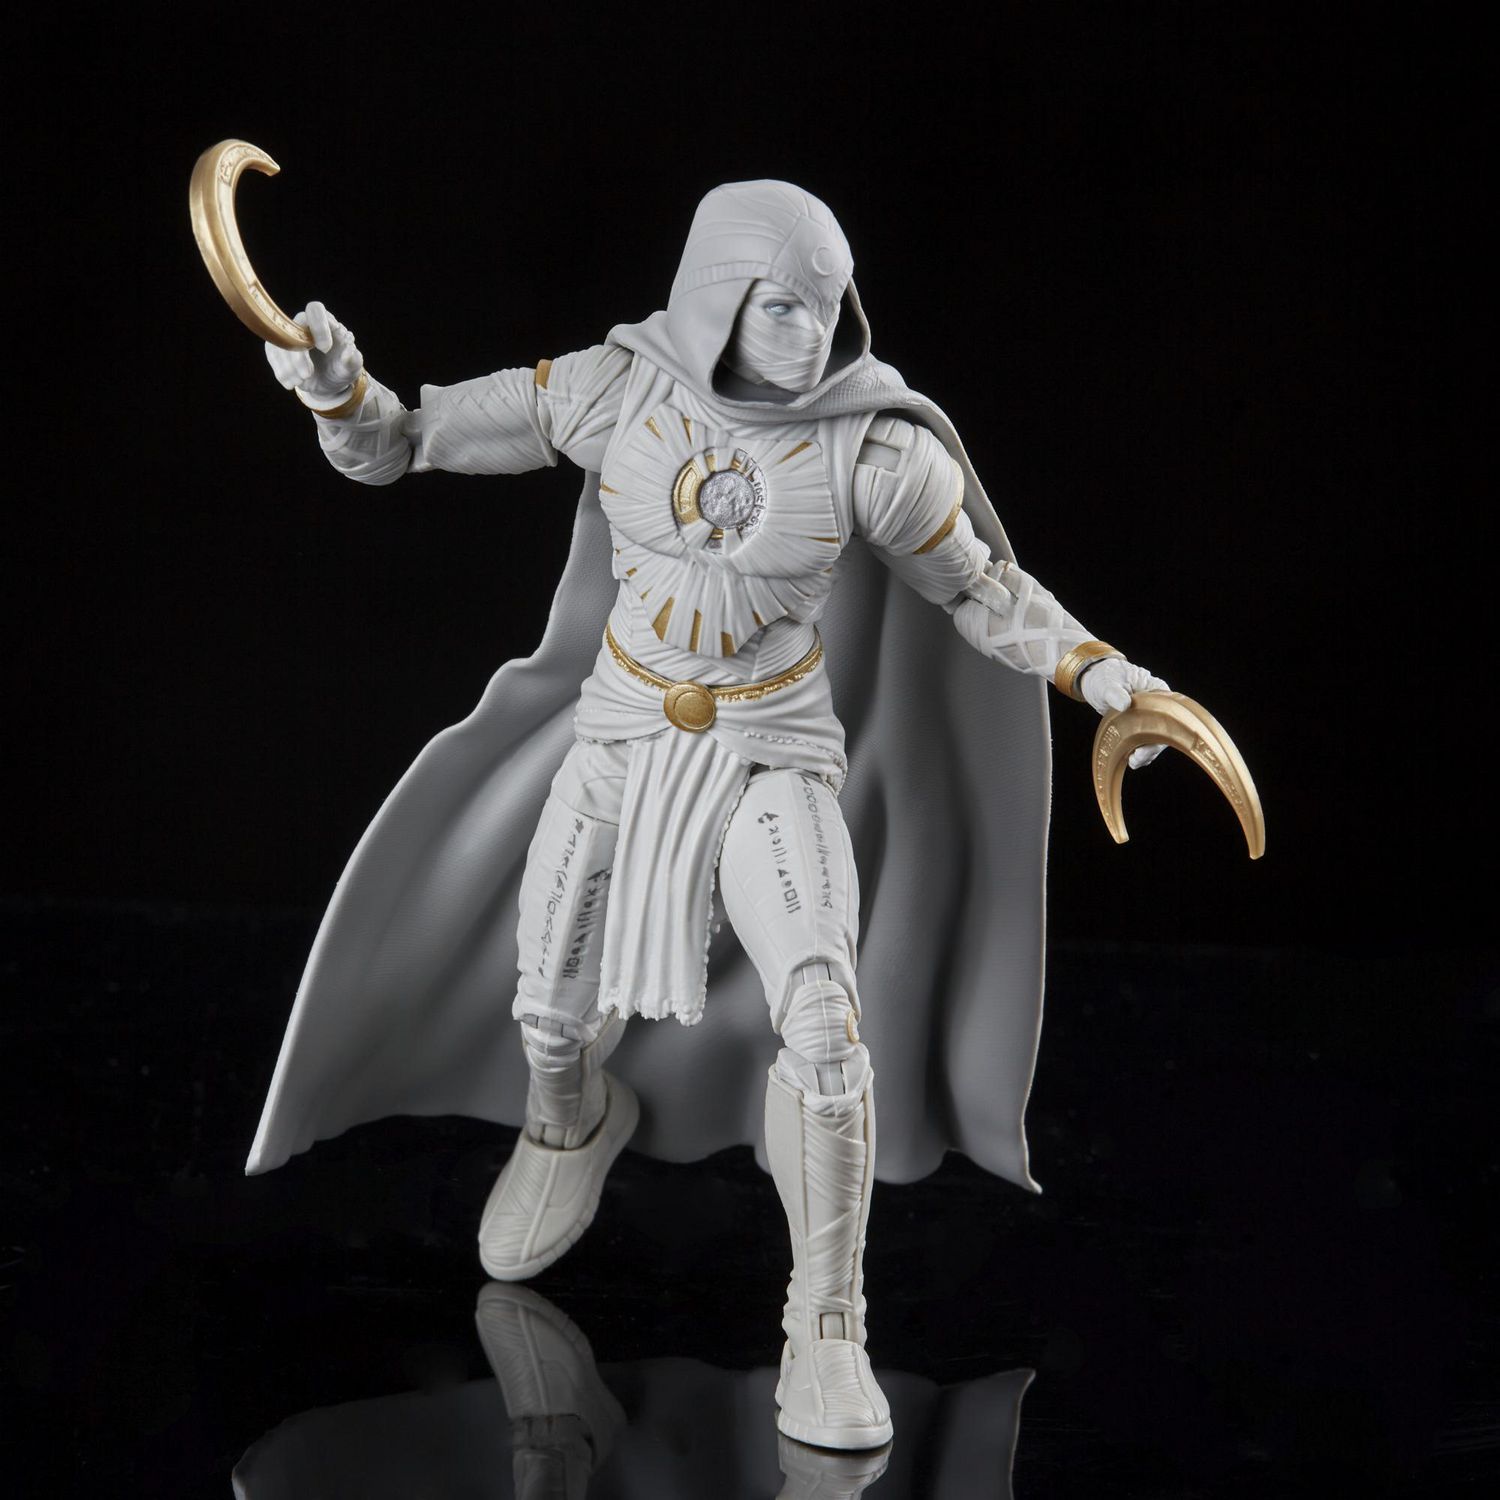 Marvel Legends Series Disney Plus Moon Knight MCU Series Action Figure  6-inch Collectible Toy, includes 4 accessories